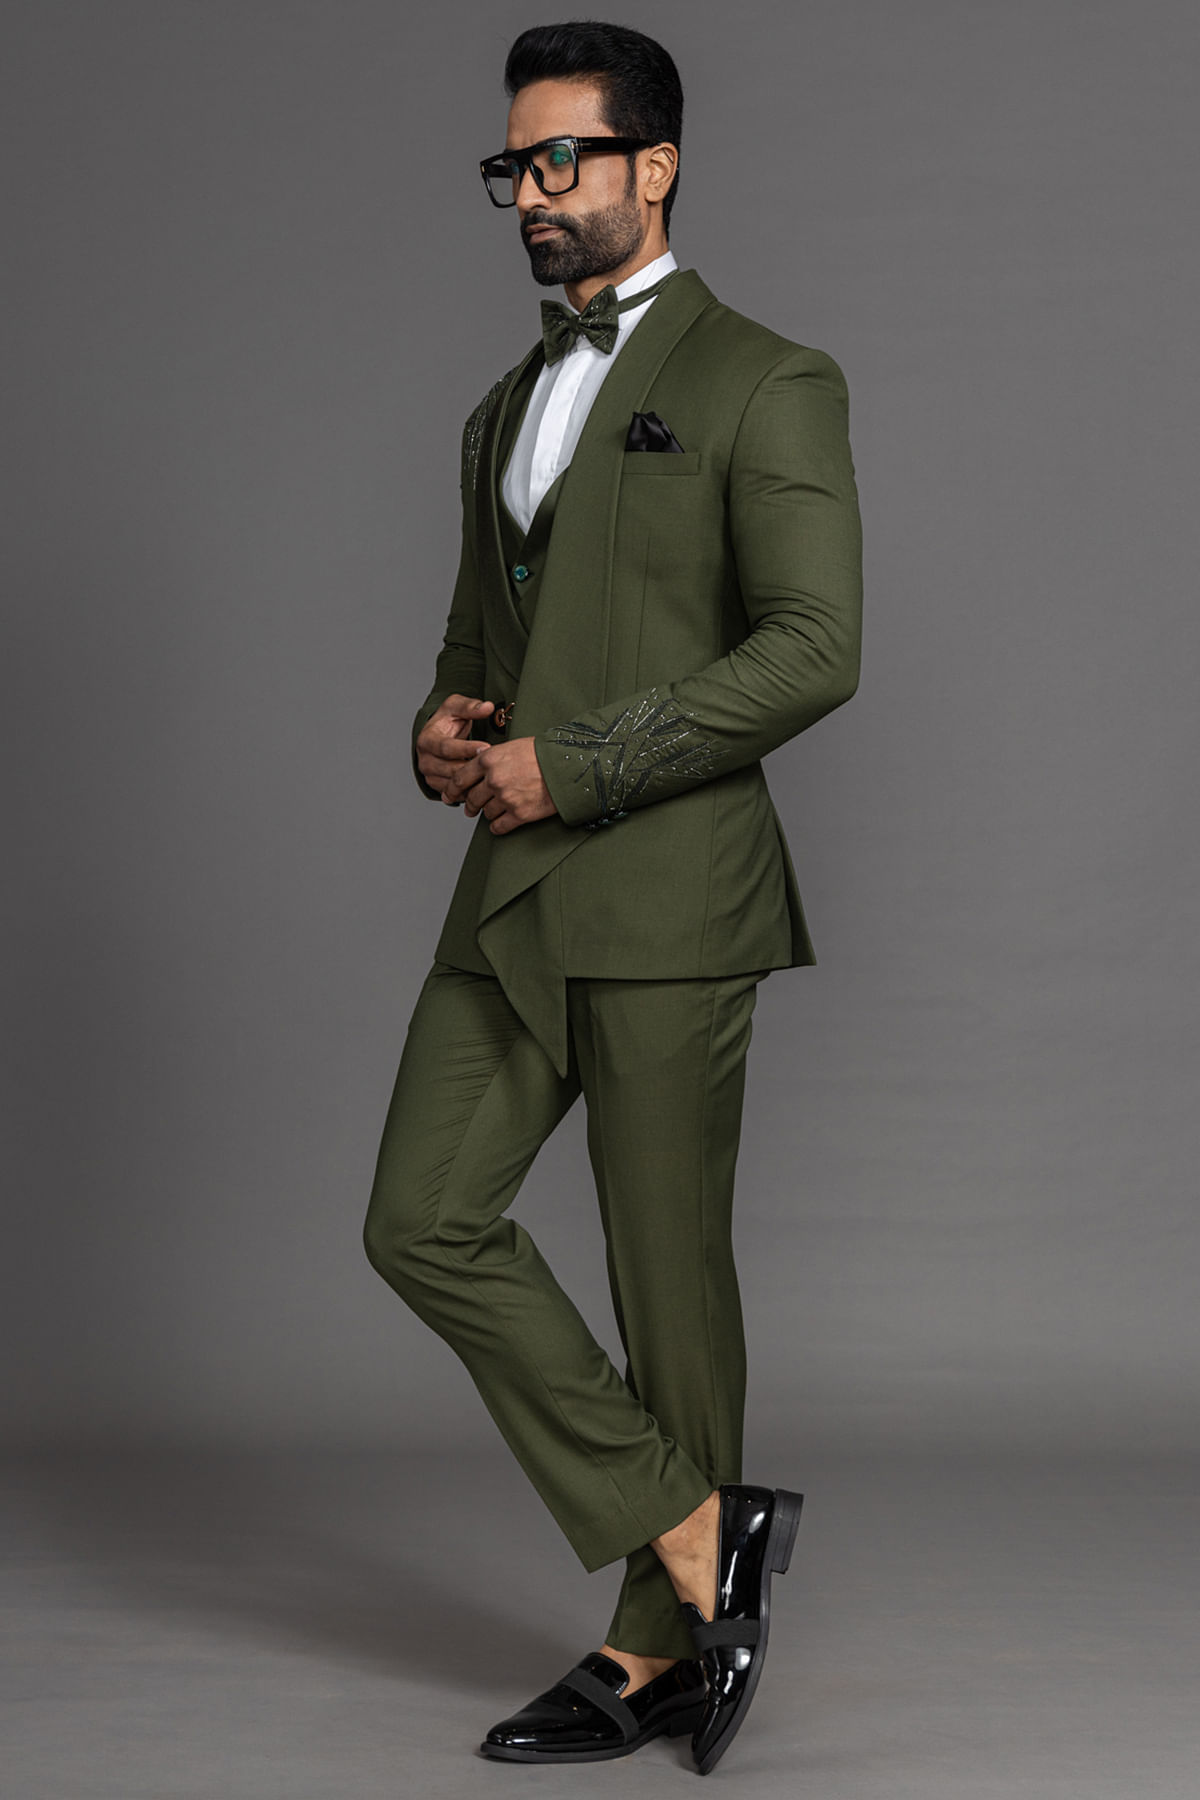 Tailor Made Corduroy Green Olive Green Suit Men Slim Fit Blazer And Pants  Set For Formal Business, Casual Parties, And Hosts From Wuyanzus, $113.84 |  DHgate.Com